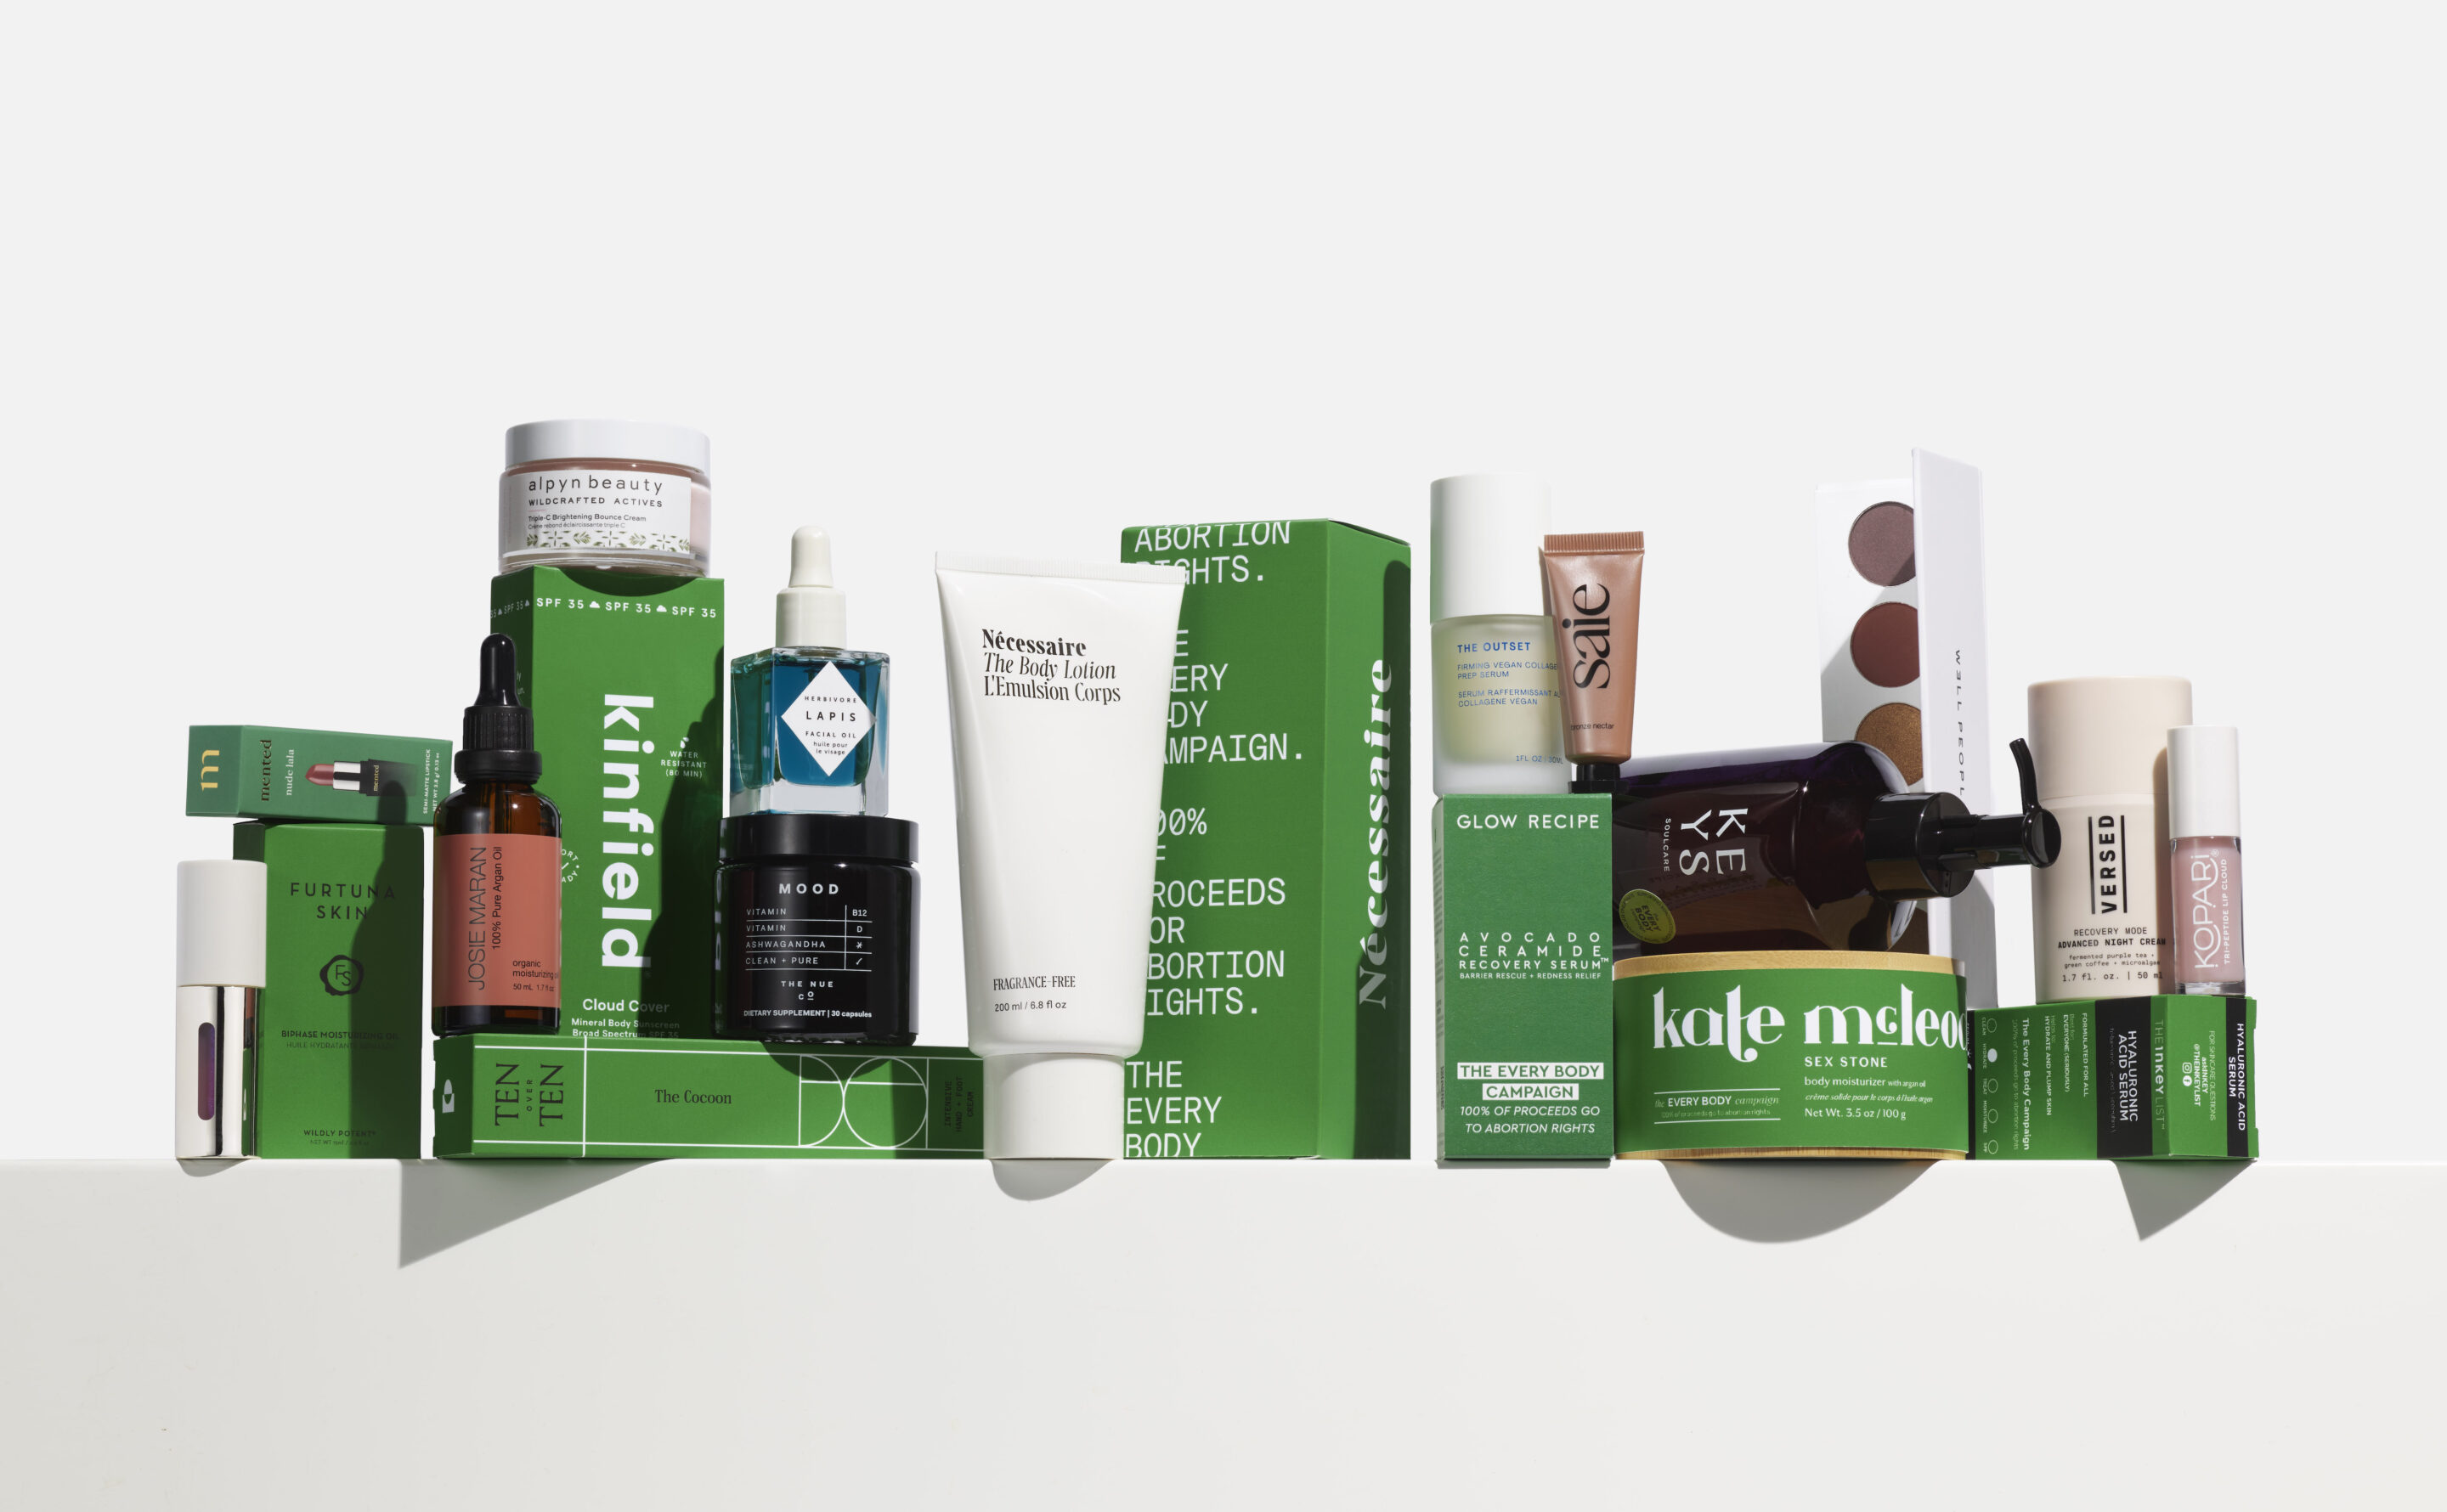 the every body campaign brands in limited edition packaging